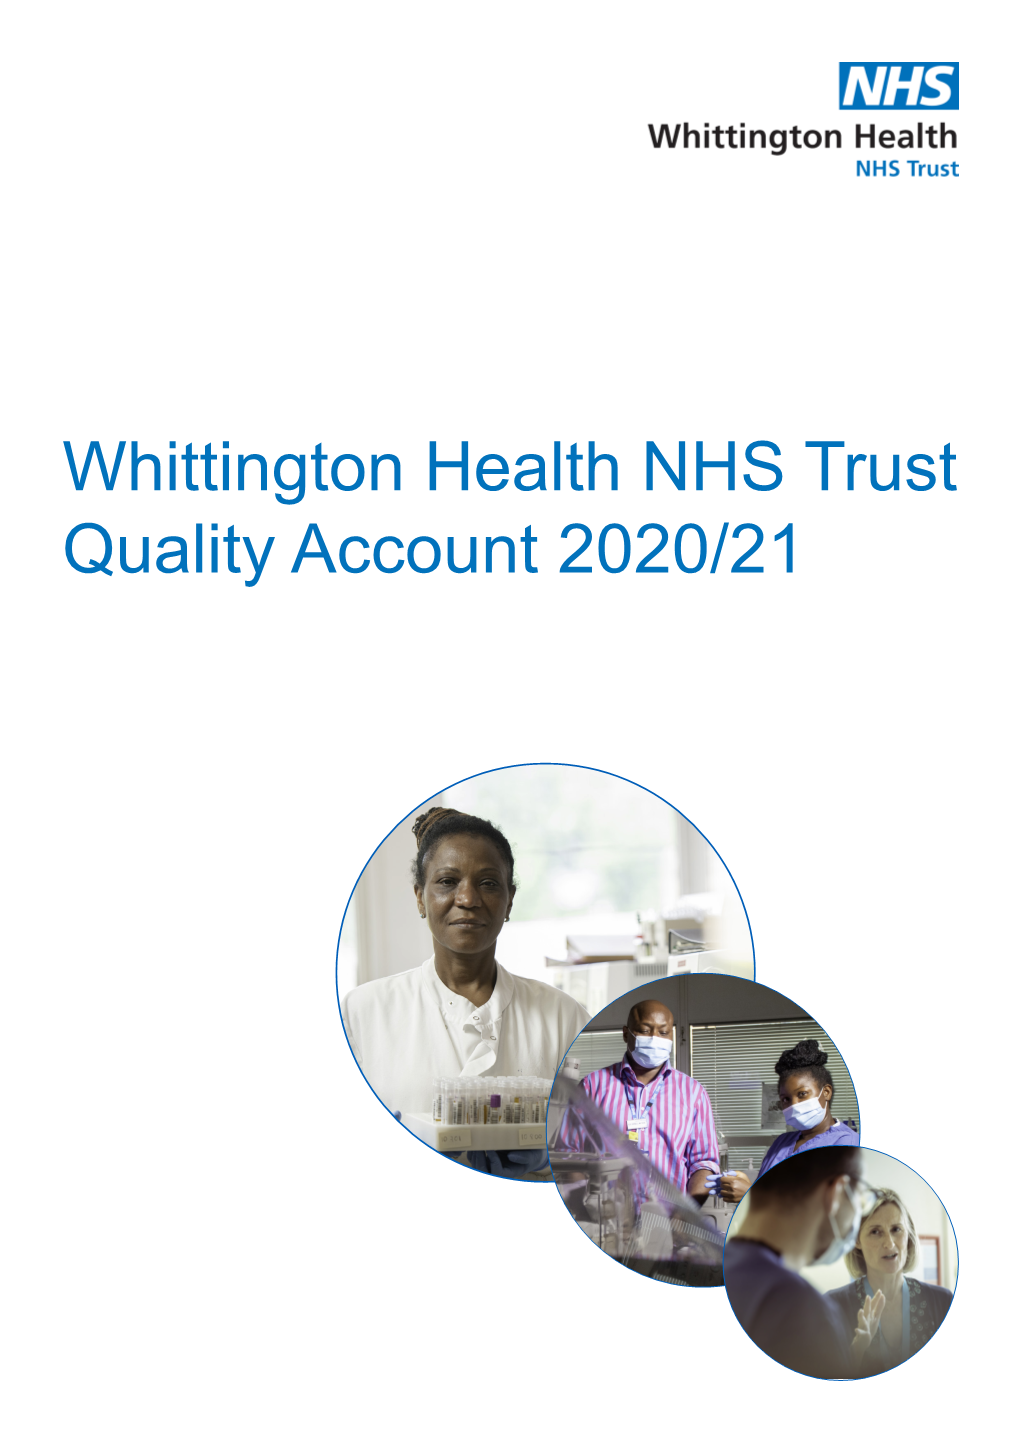 Whittington Health NHS Trust Quality Account 2020/21 Contents